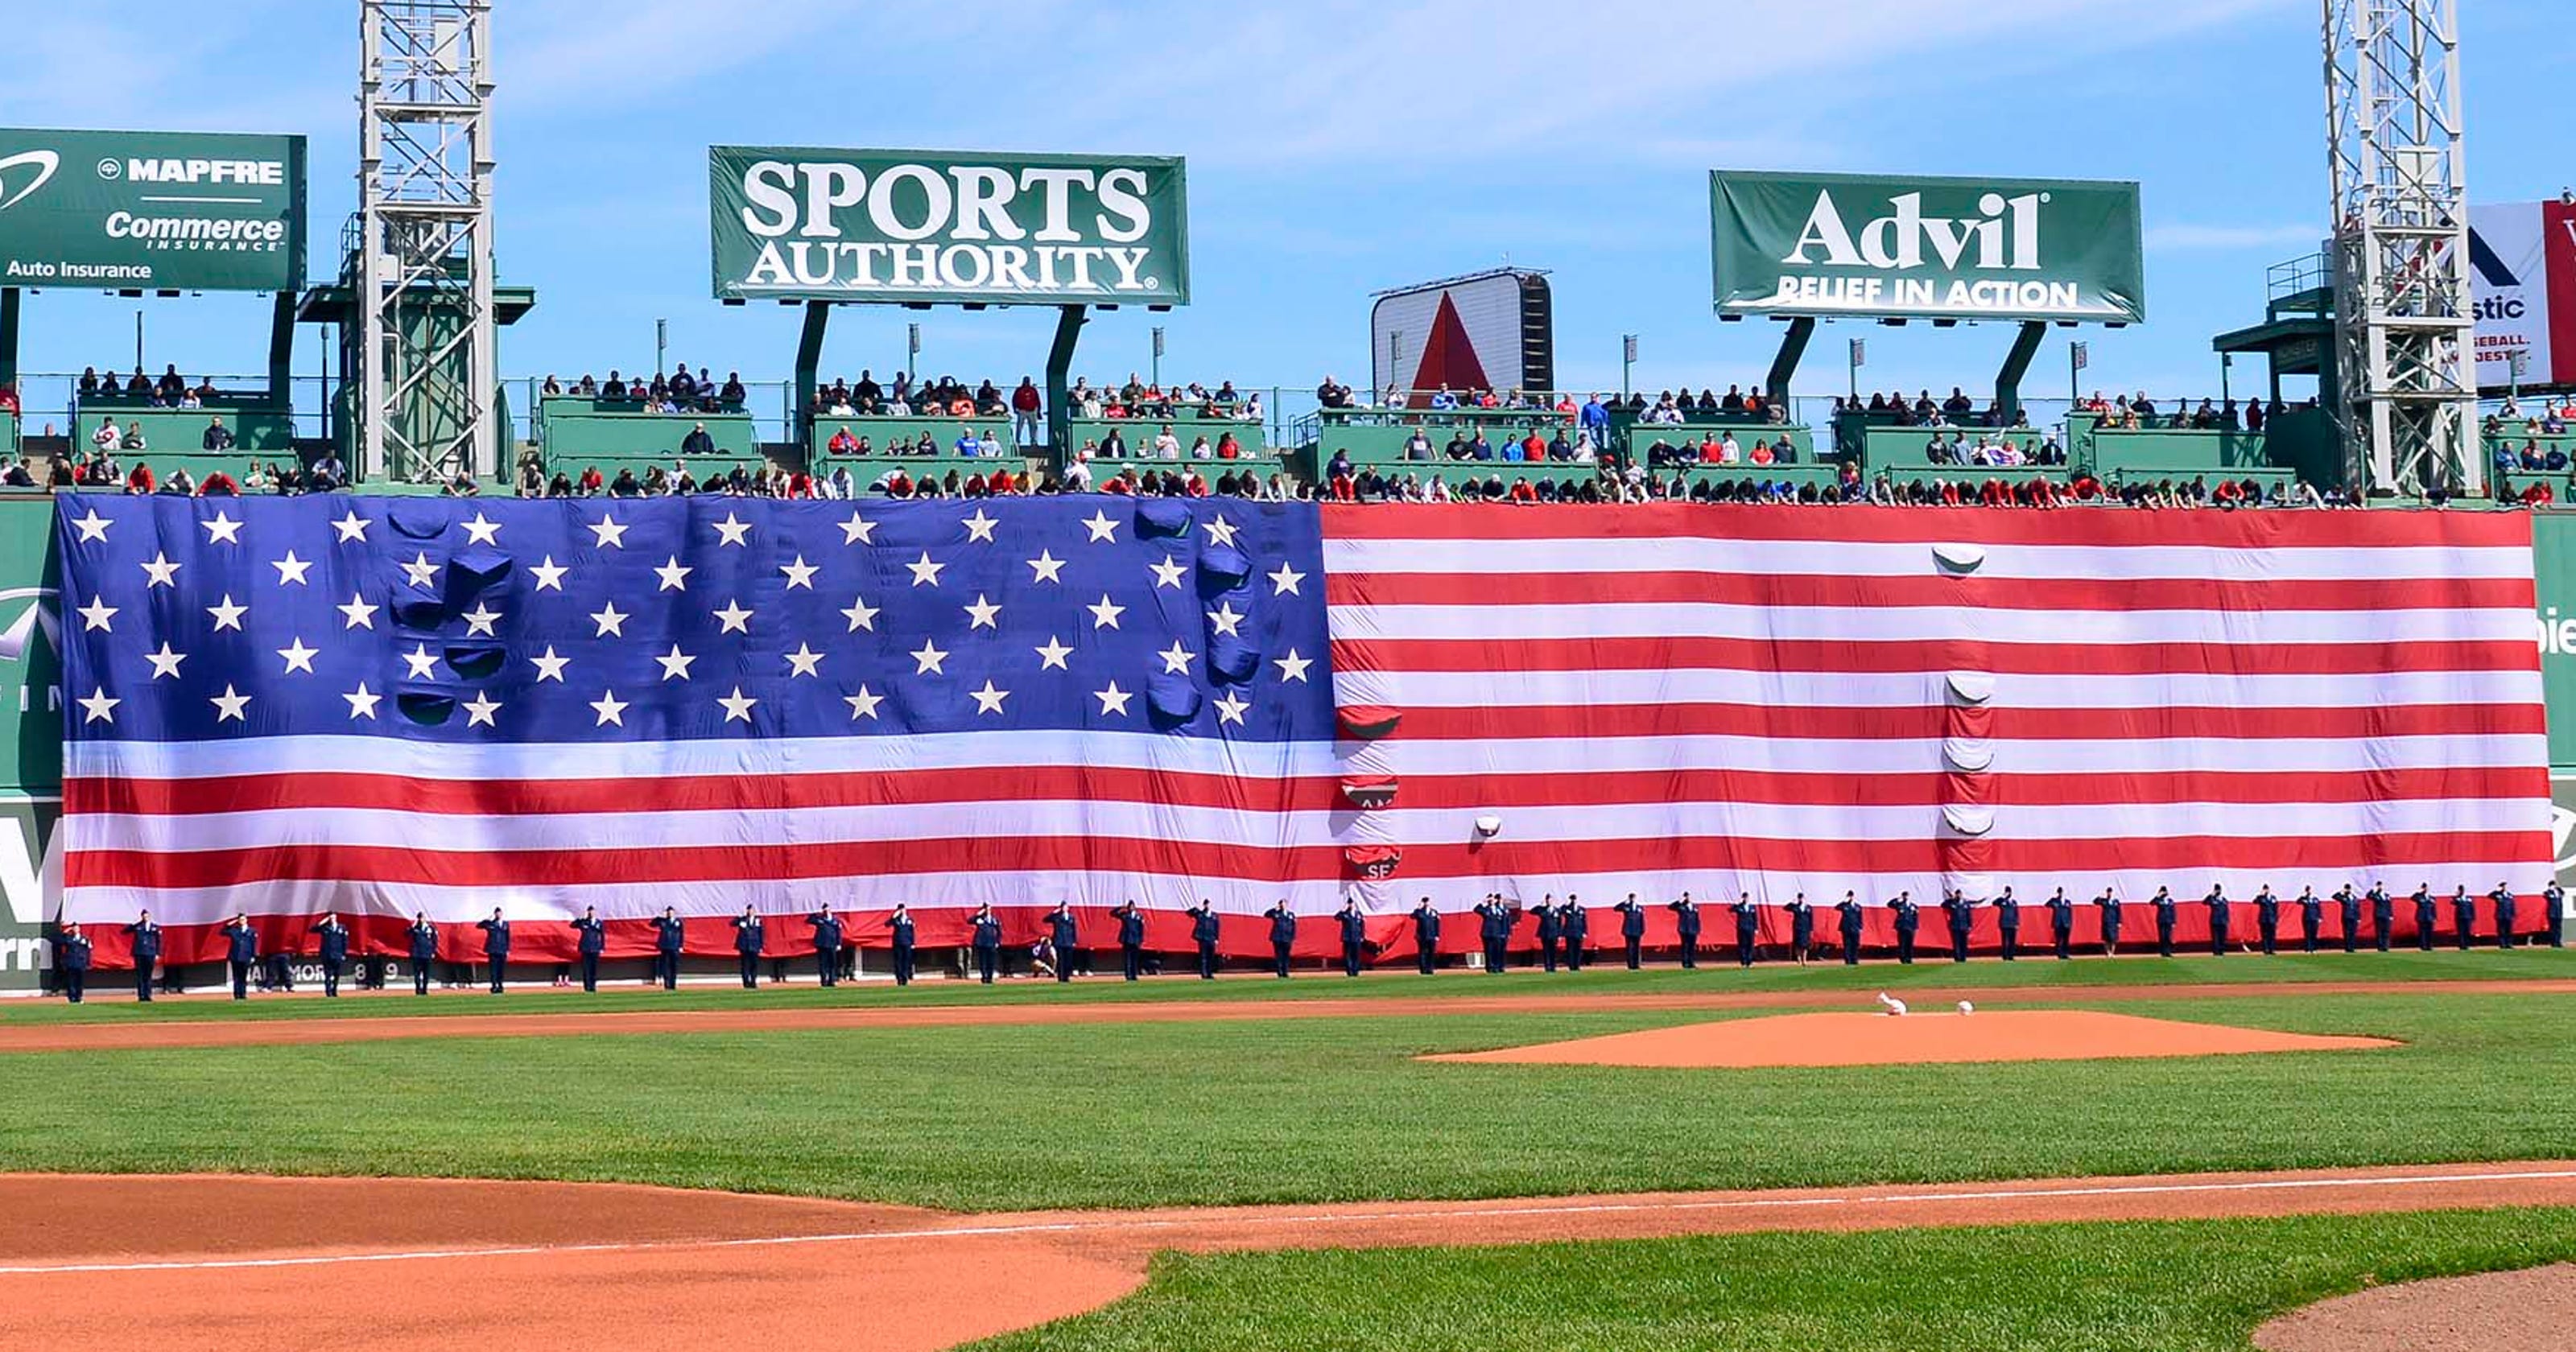 Red Sox have Memorial Day tribute at an empty Fenway Park